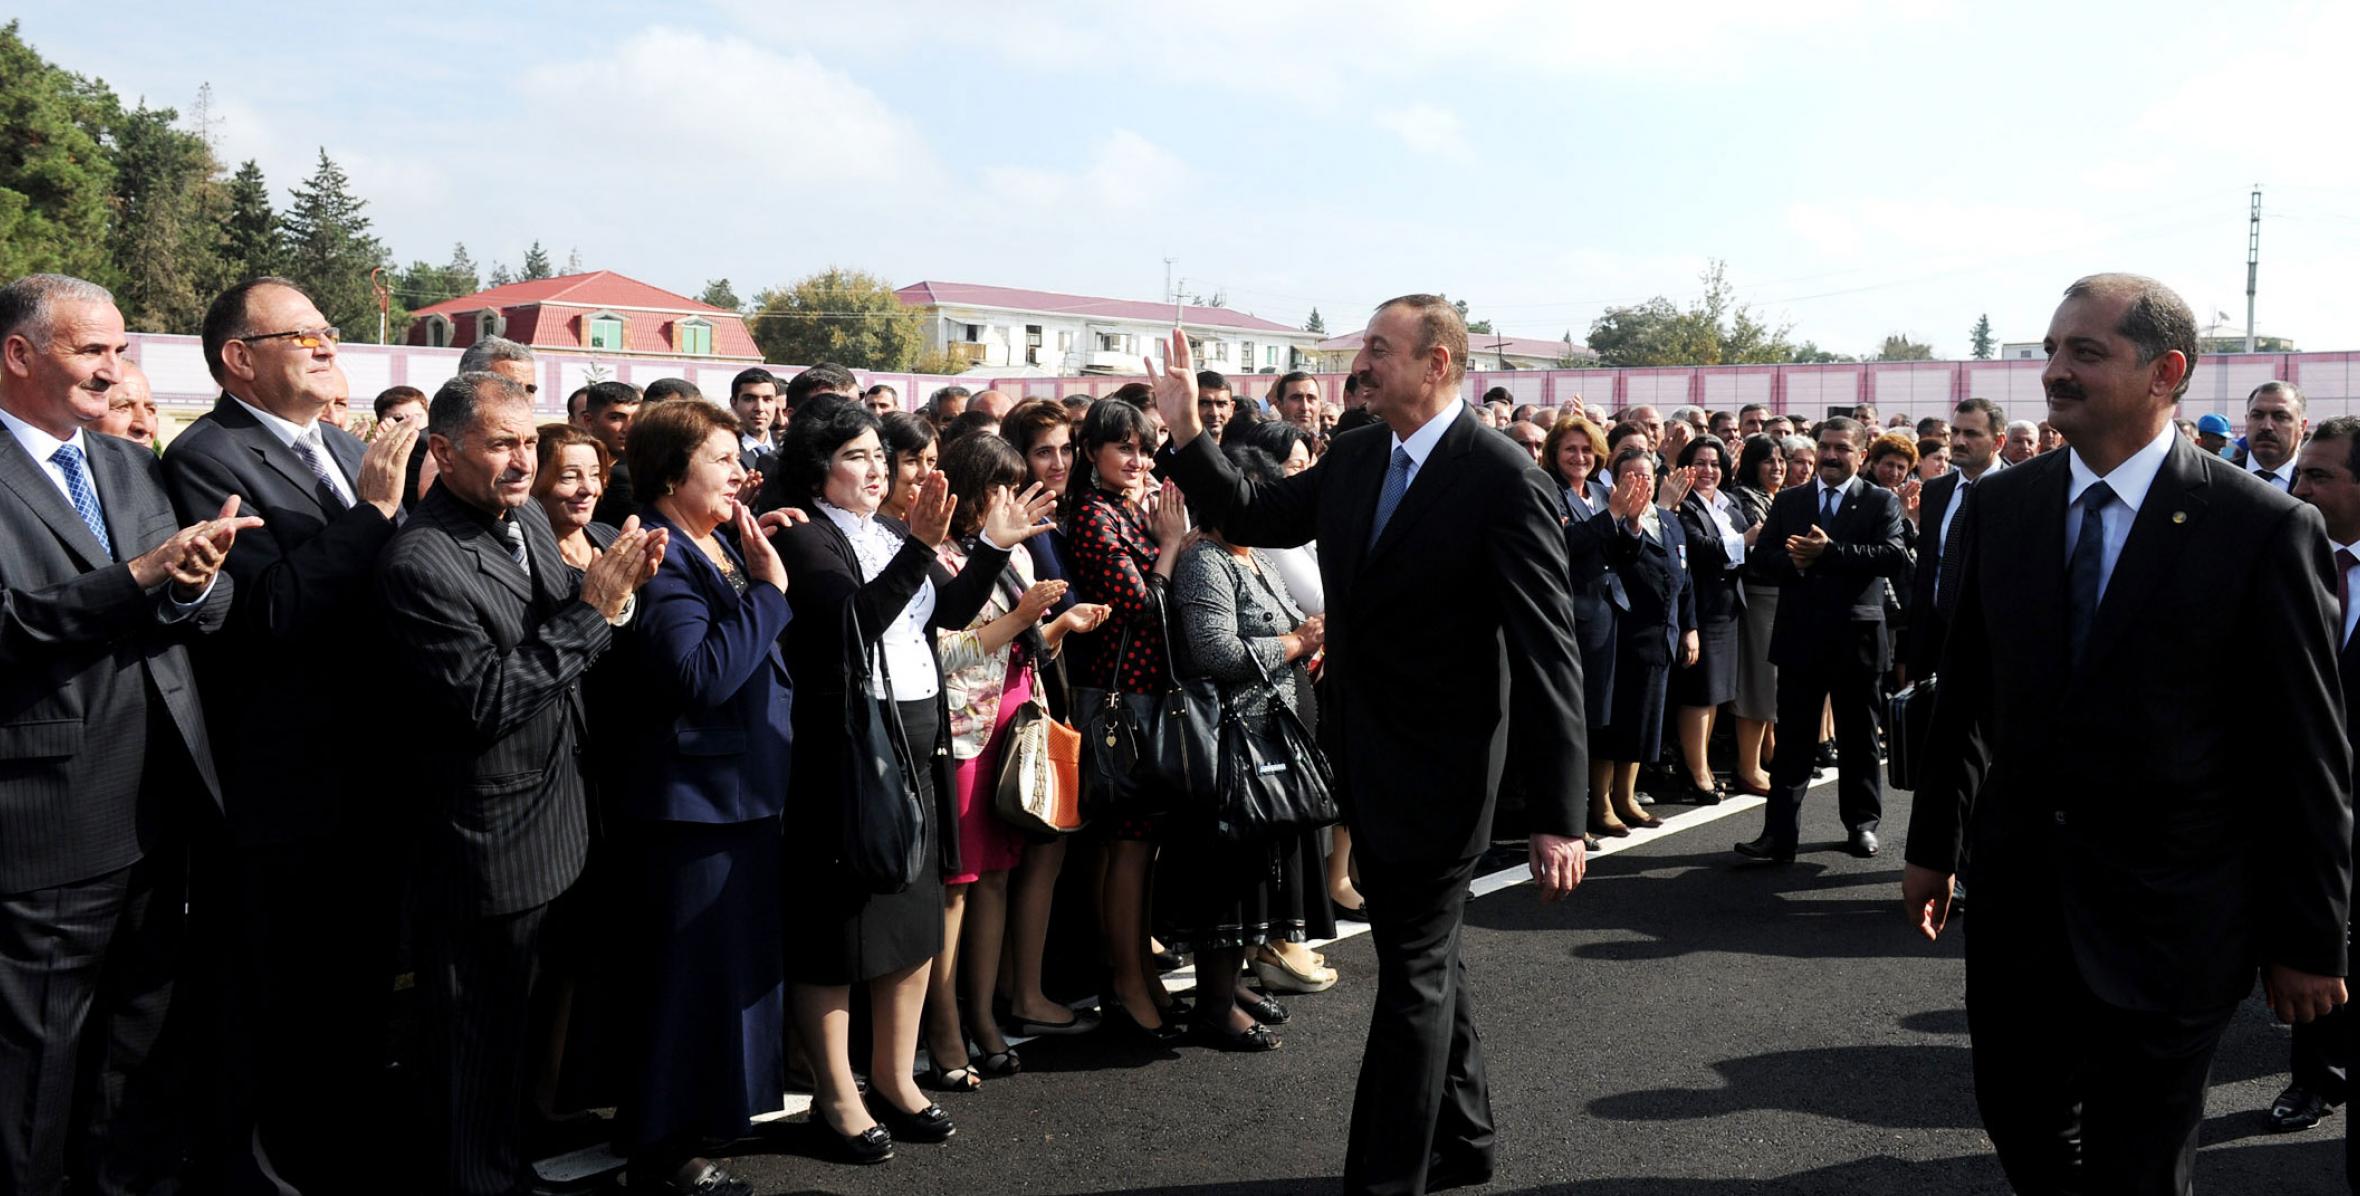 Ilham Aliyev attended a ceremony to commission the Imishli municipal system of water reservoirs